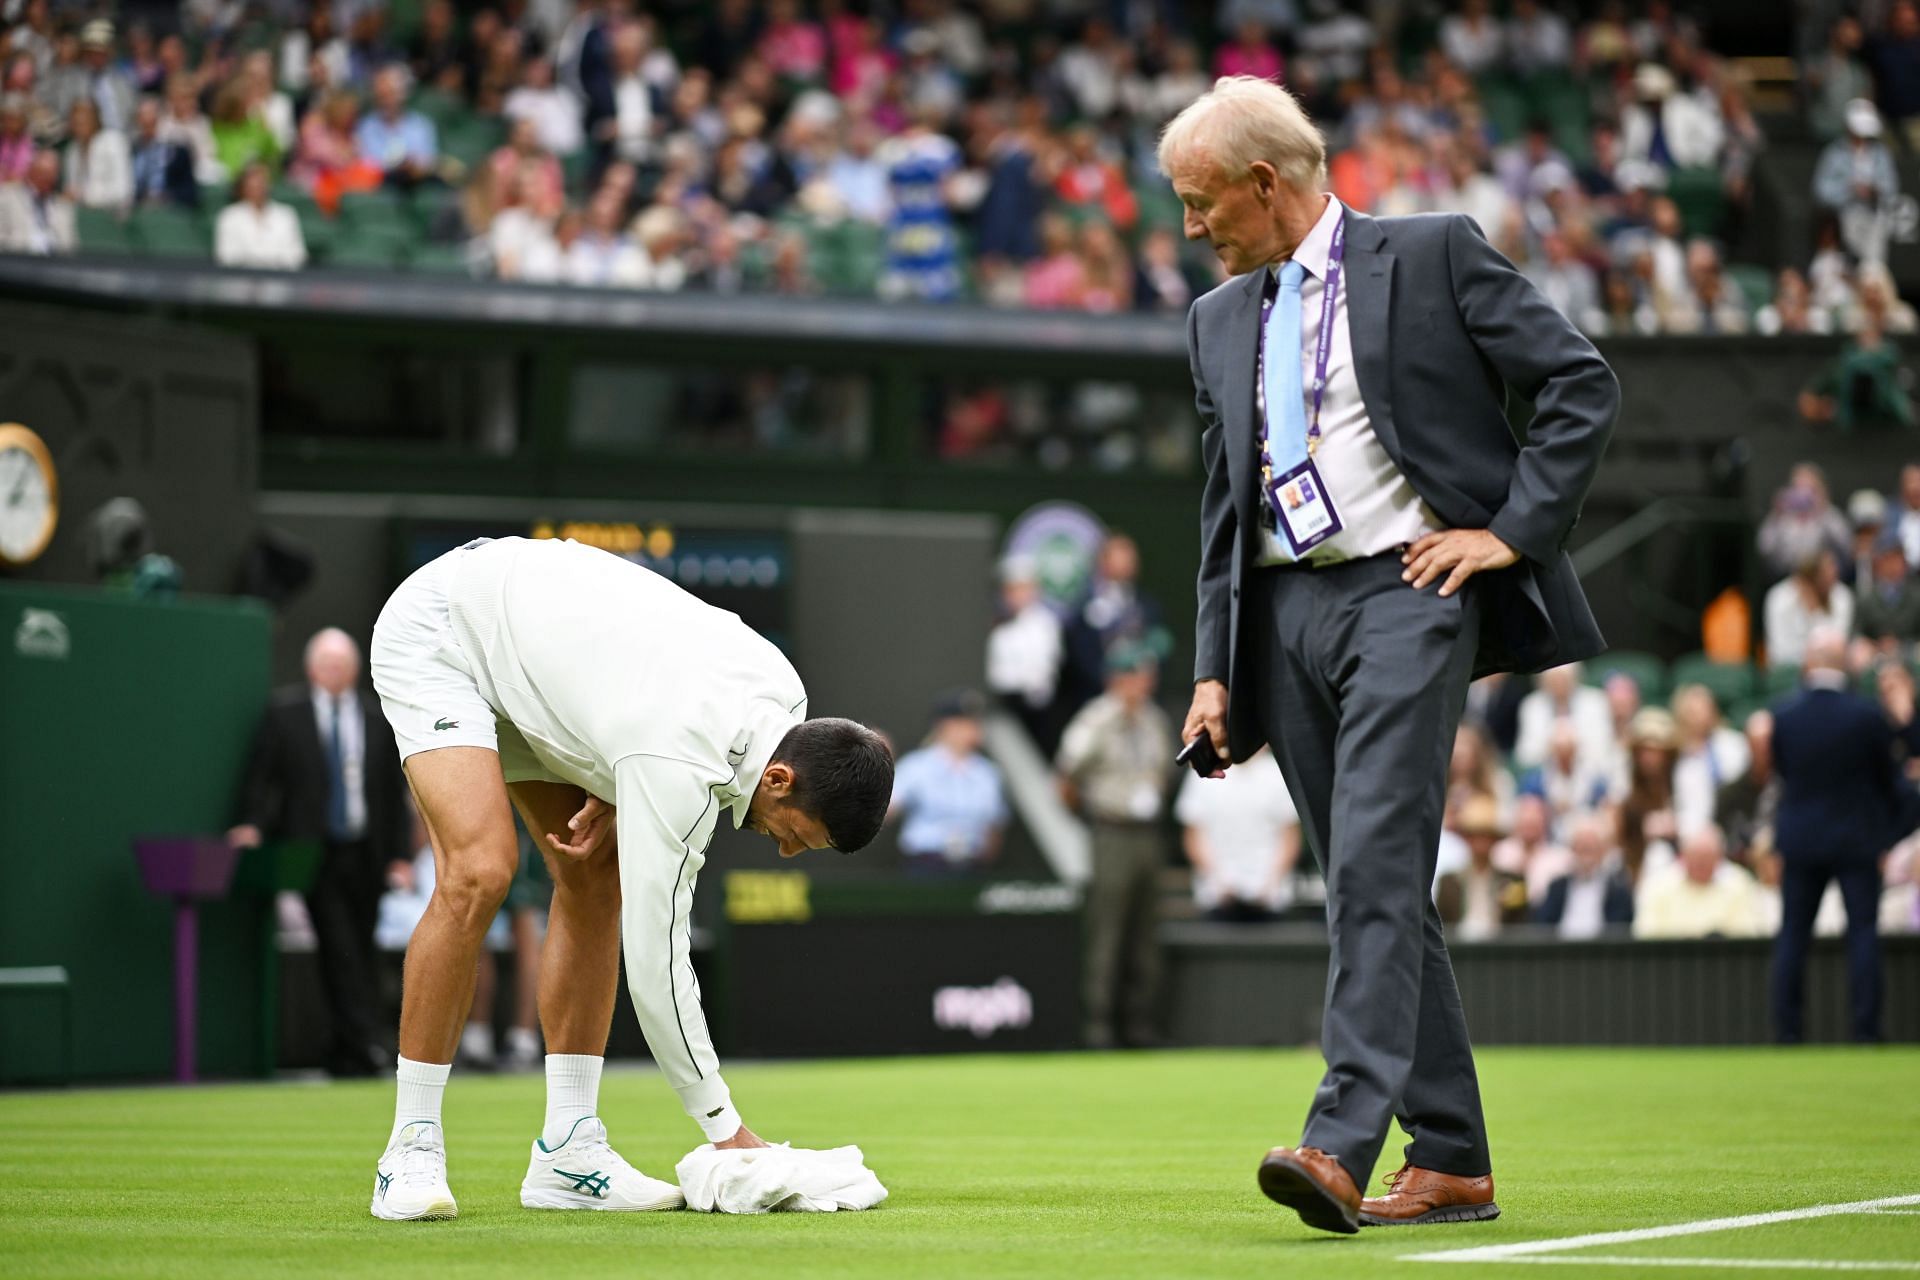 Djokovic mops up in the presence of Wimbledon officials